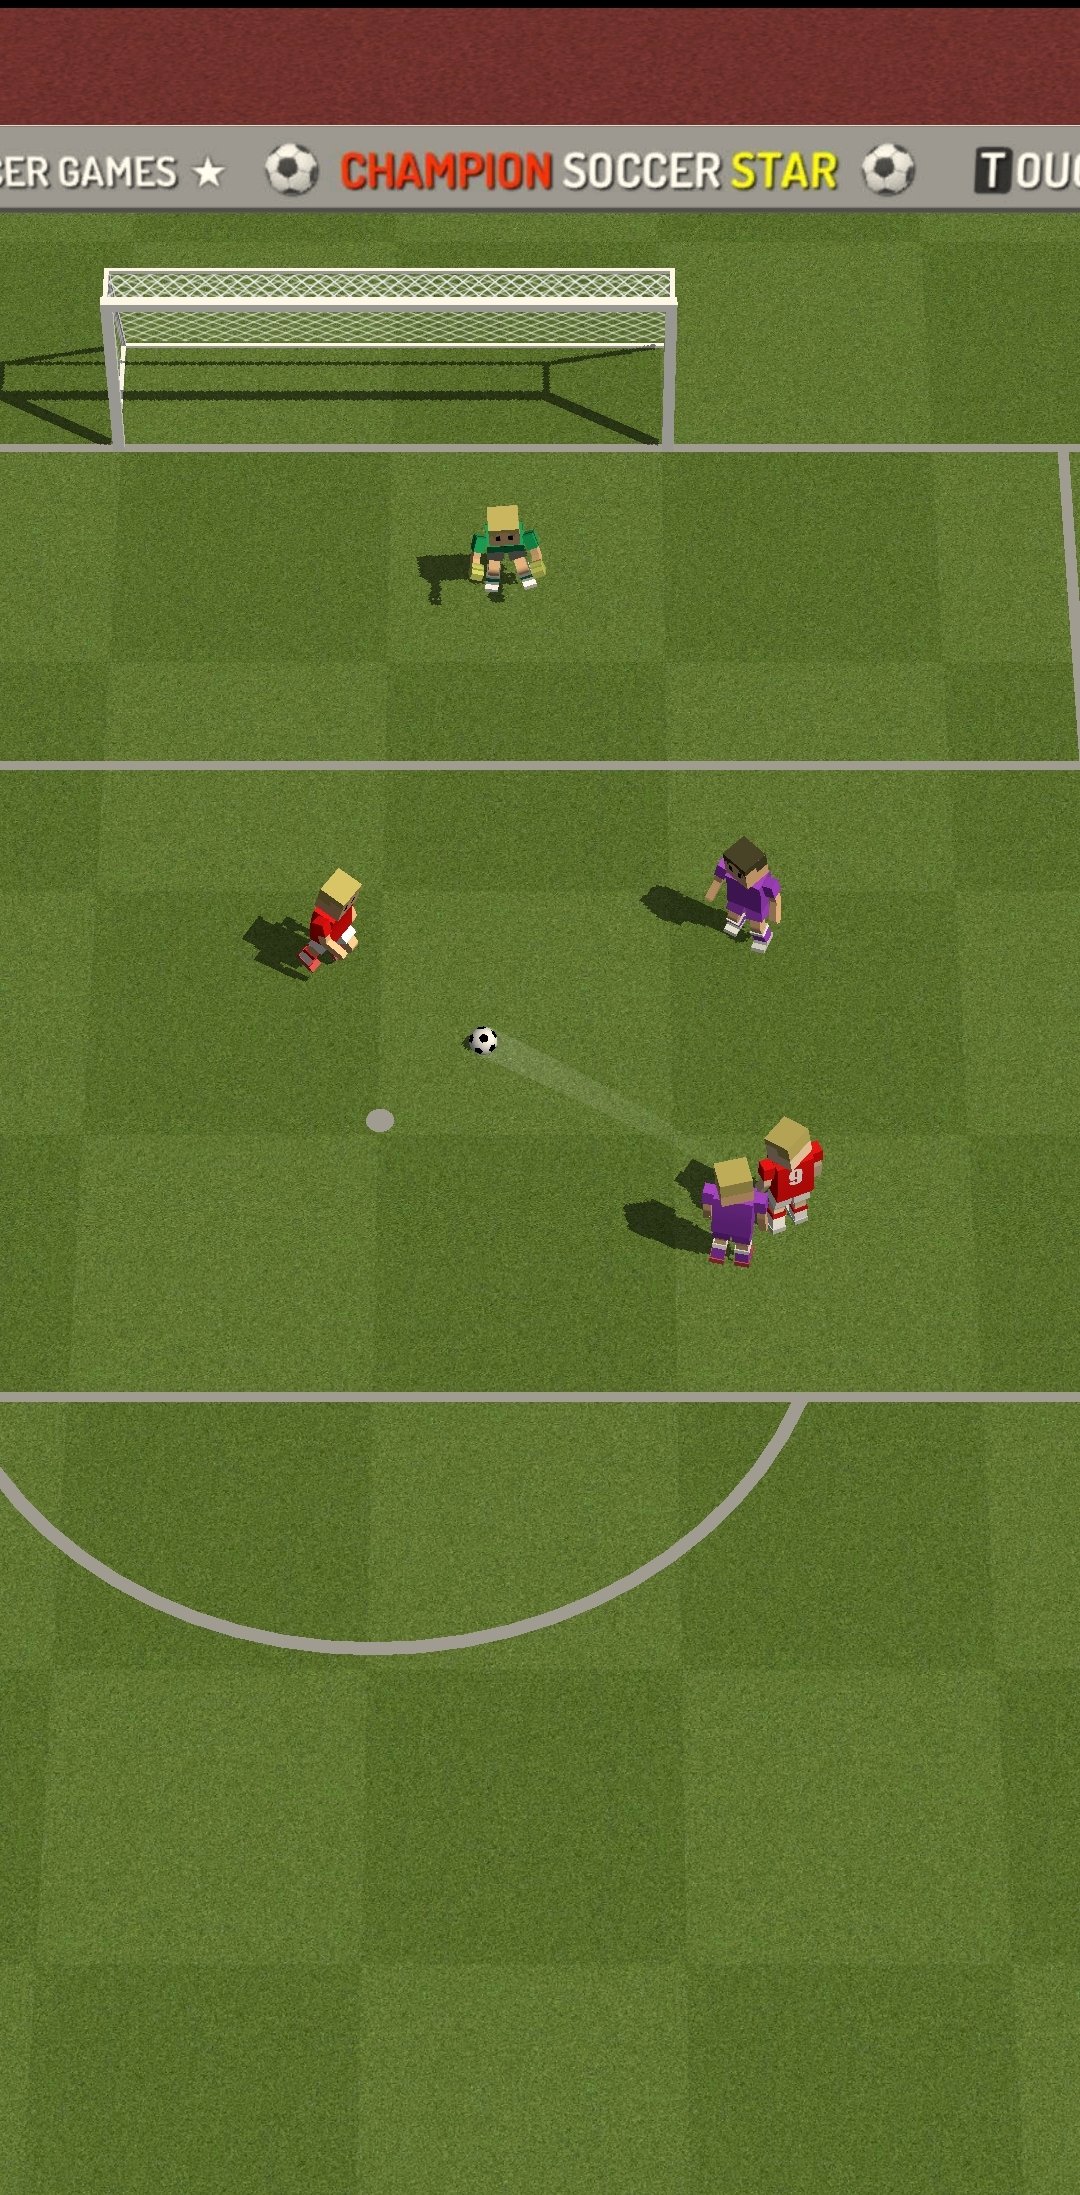 Champion Soccer Star: Cup Game for Android - Free App Download